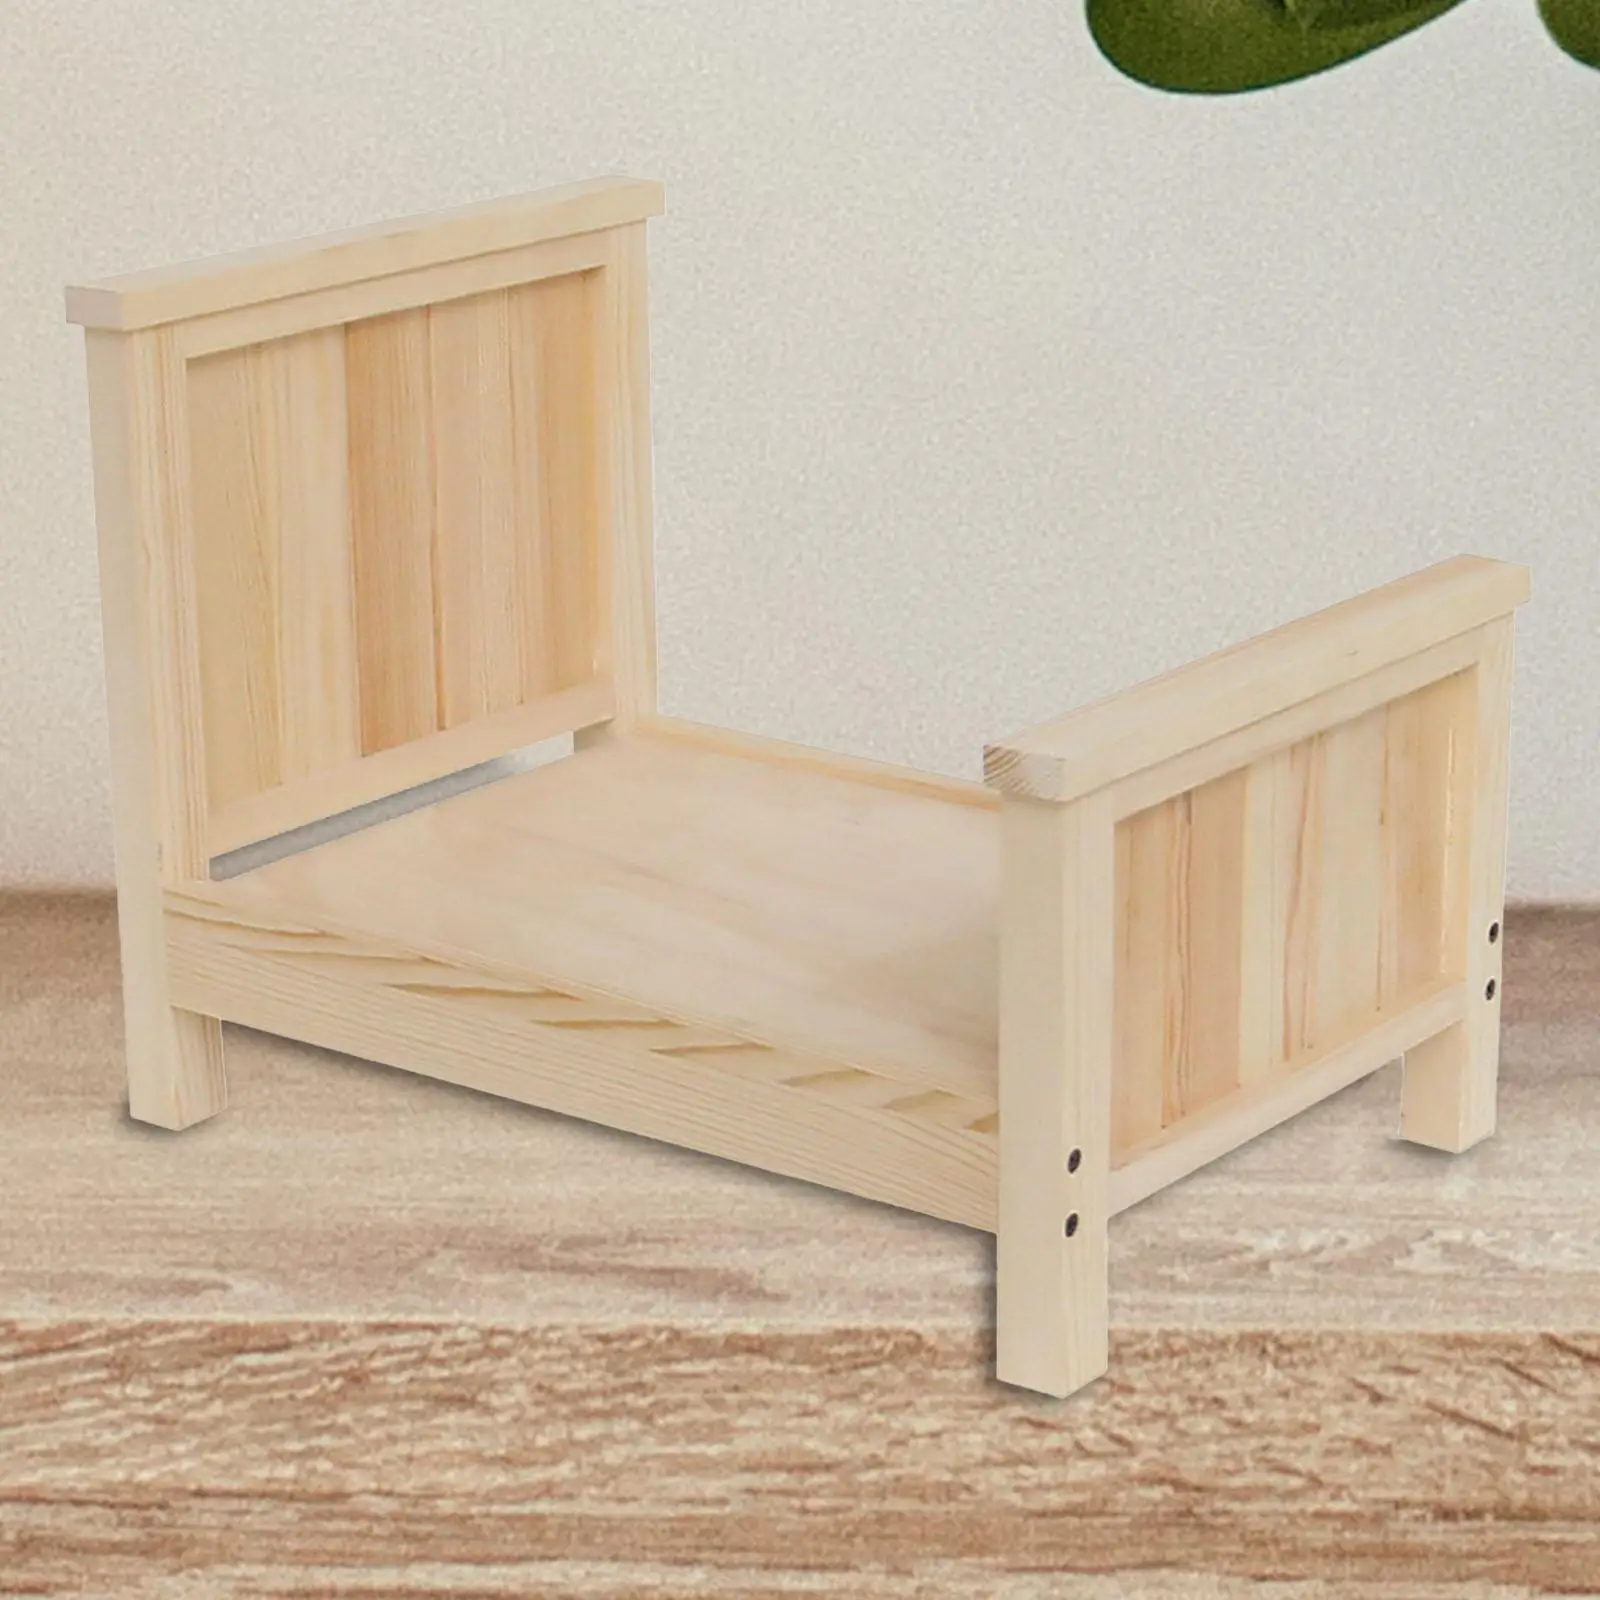 Wooden Baby Photo Prop Doll Bed Photo Background Props Fashion Cute Decor